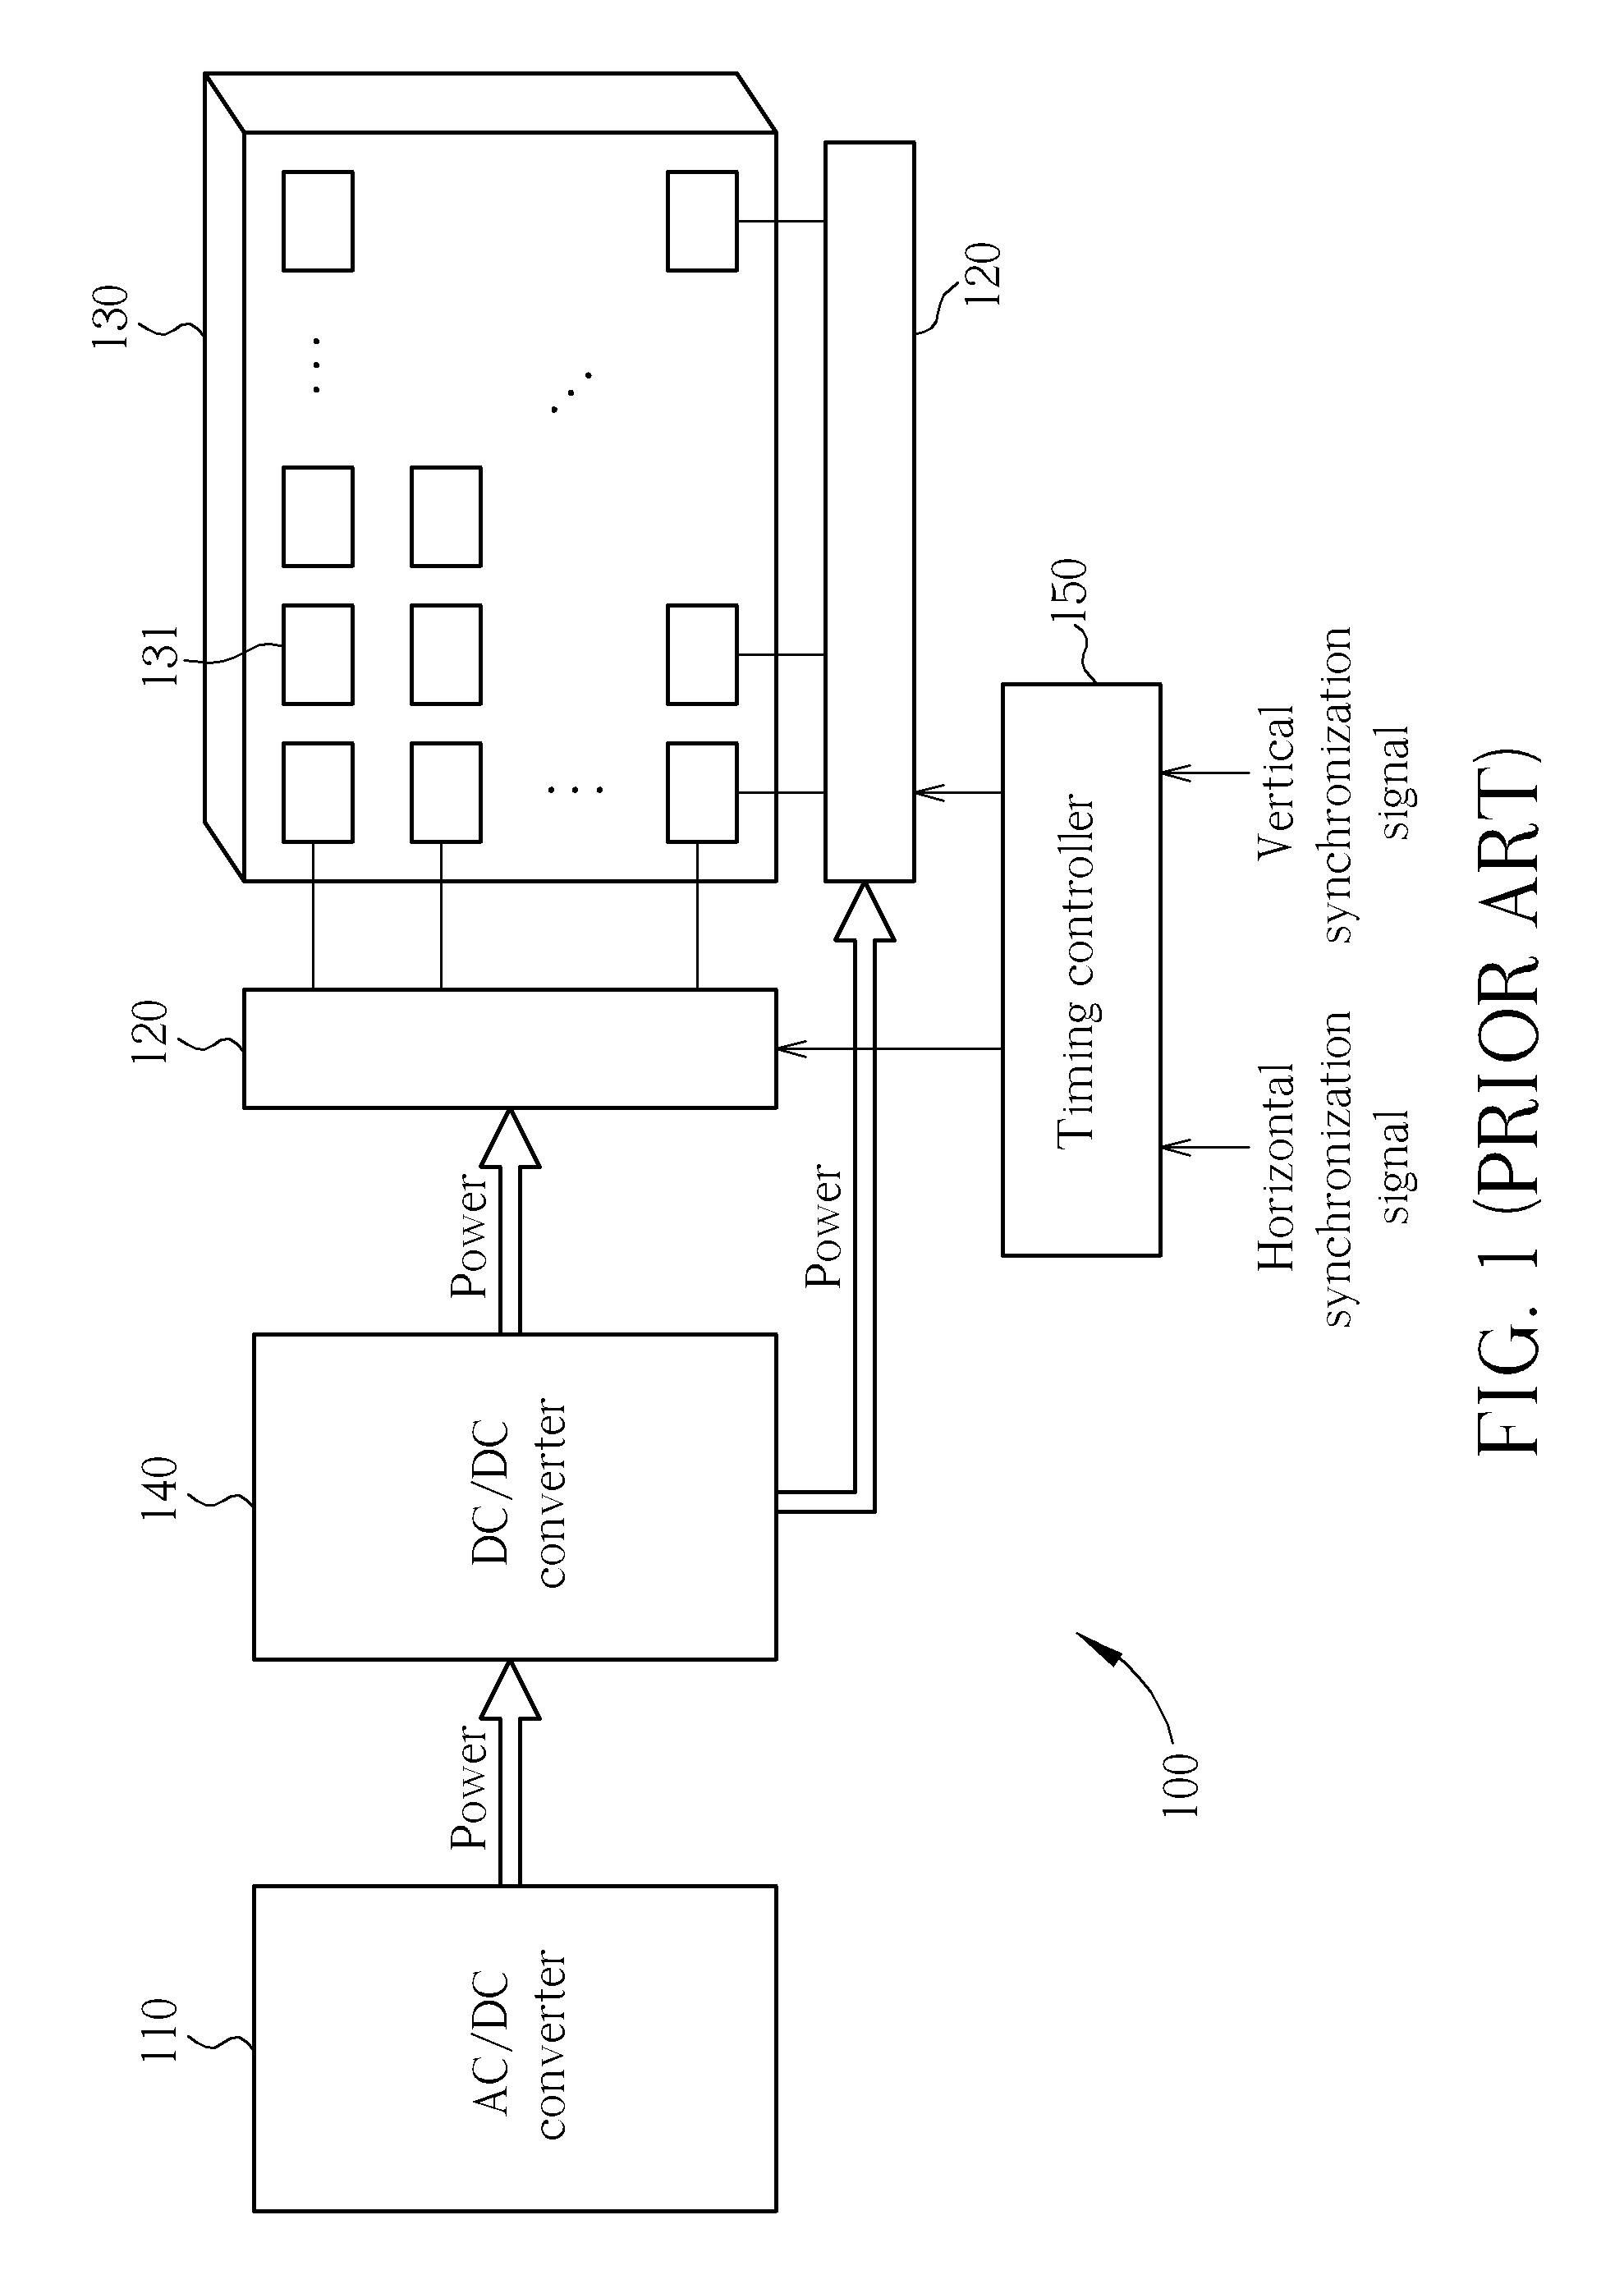 Display and Power Supply Control Method of a Display